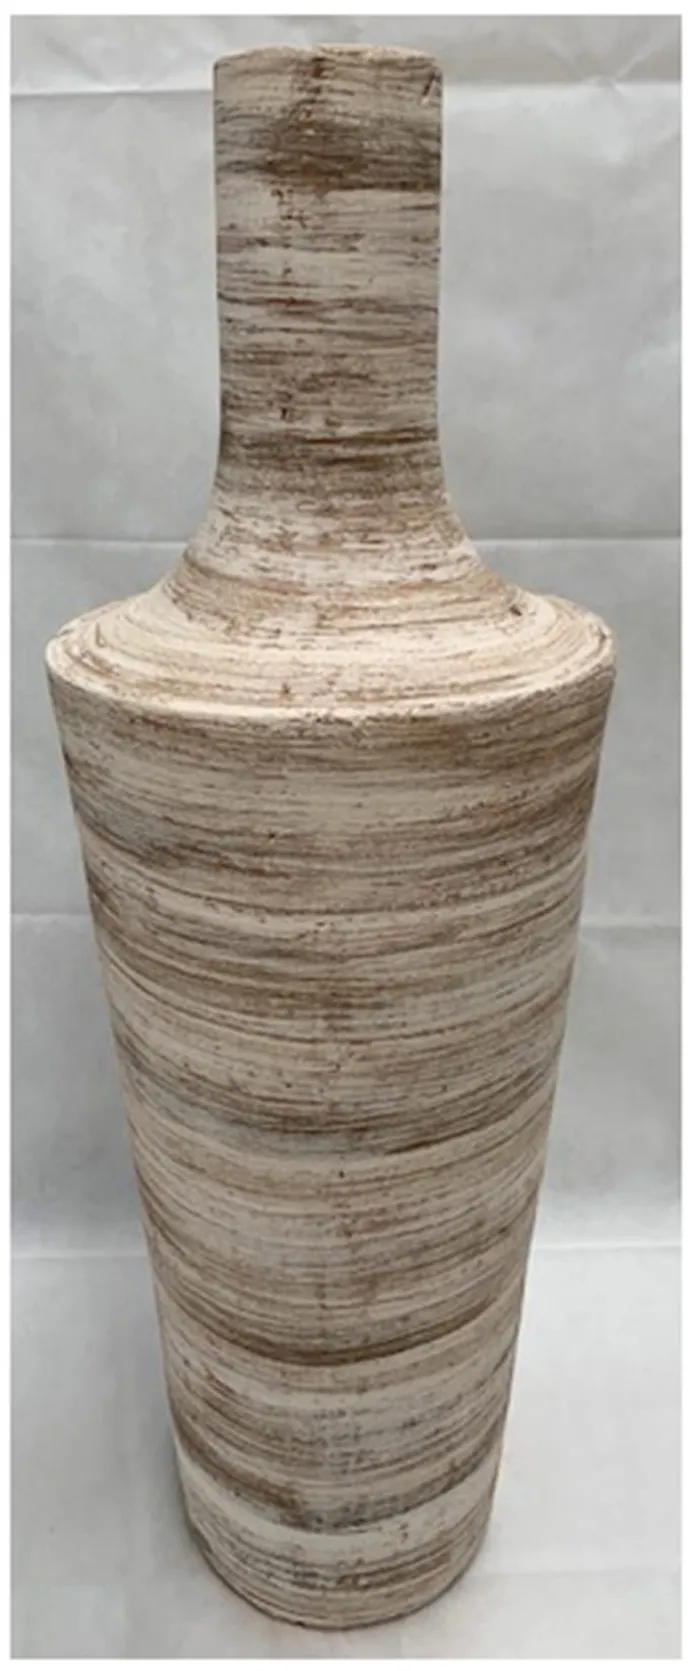 Brown and White Swirl Large Floor Vase 15"W x 51"H